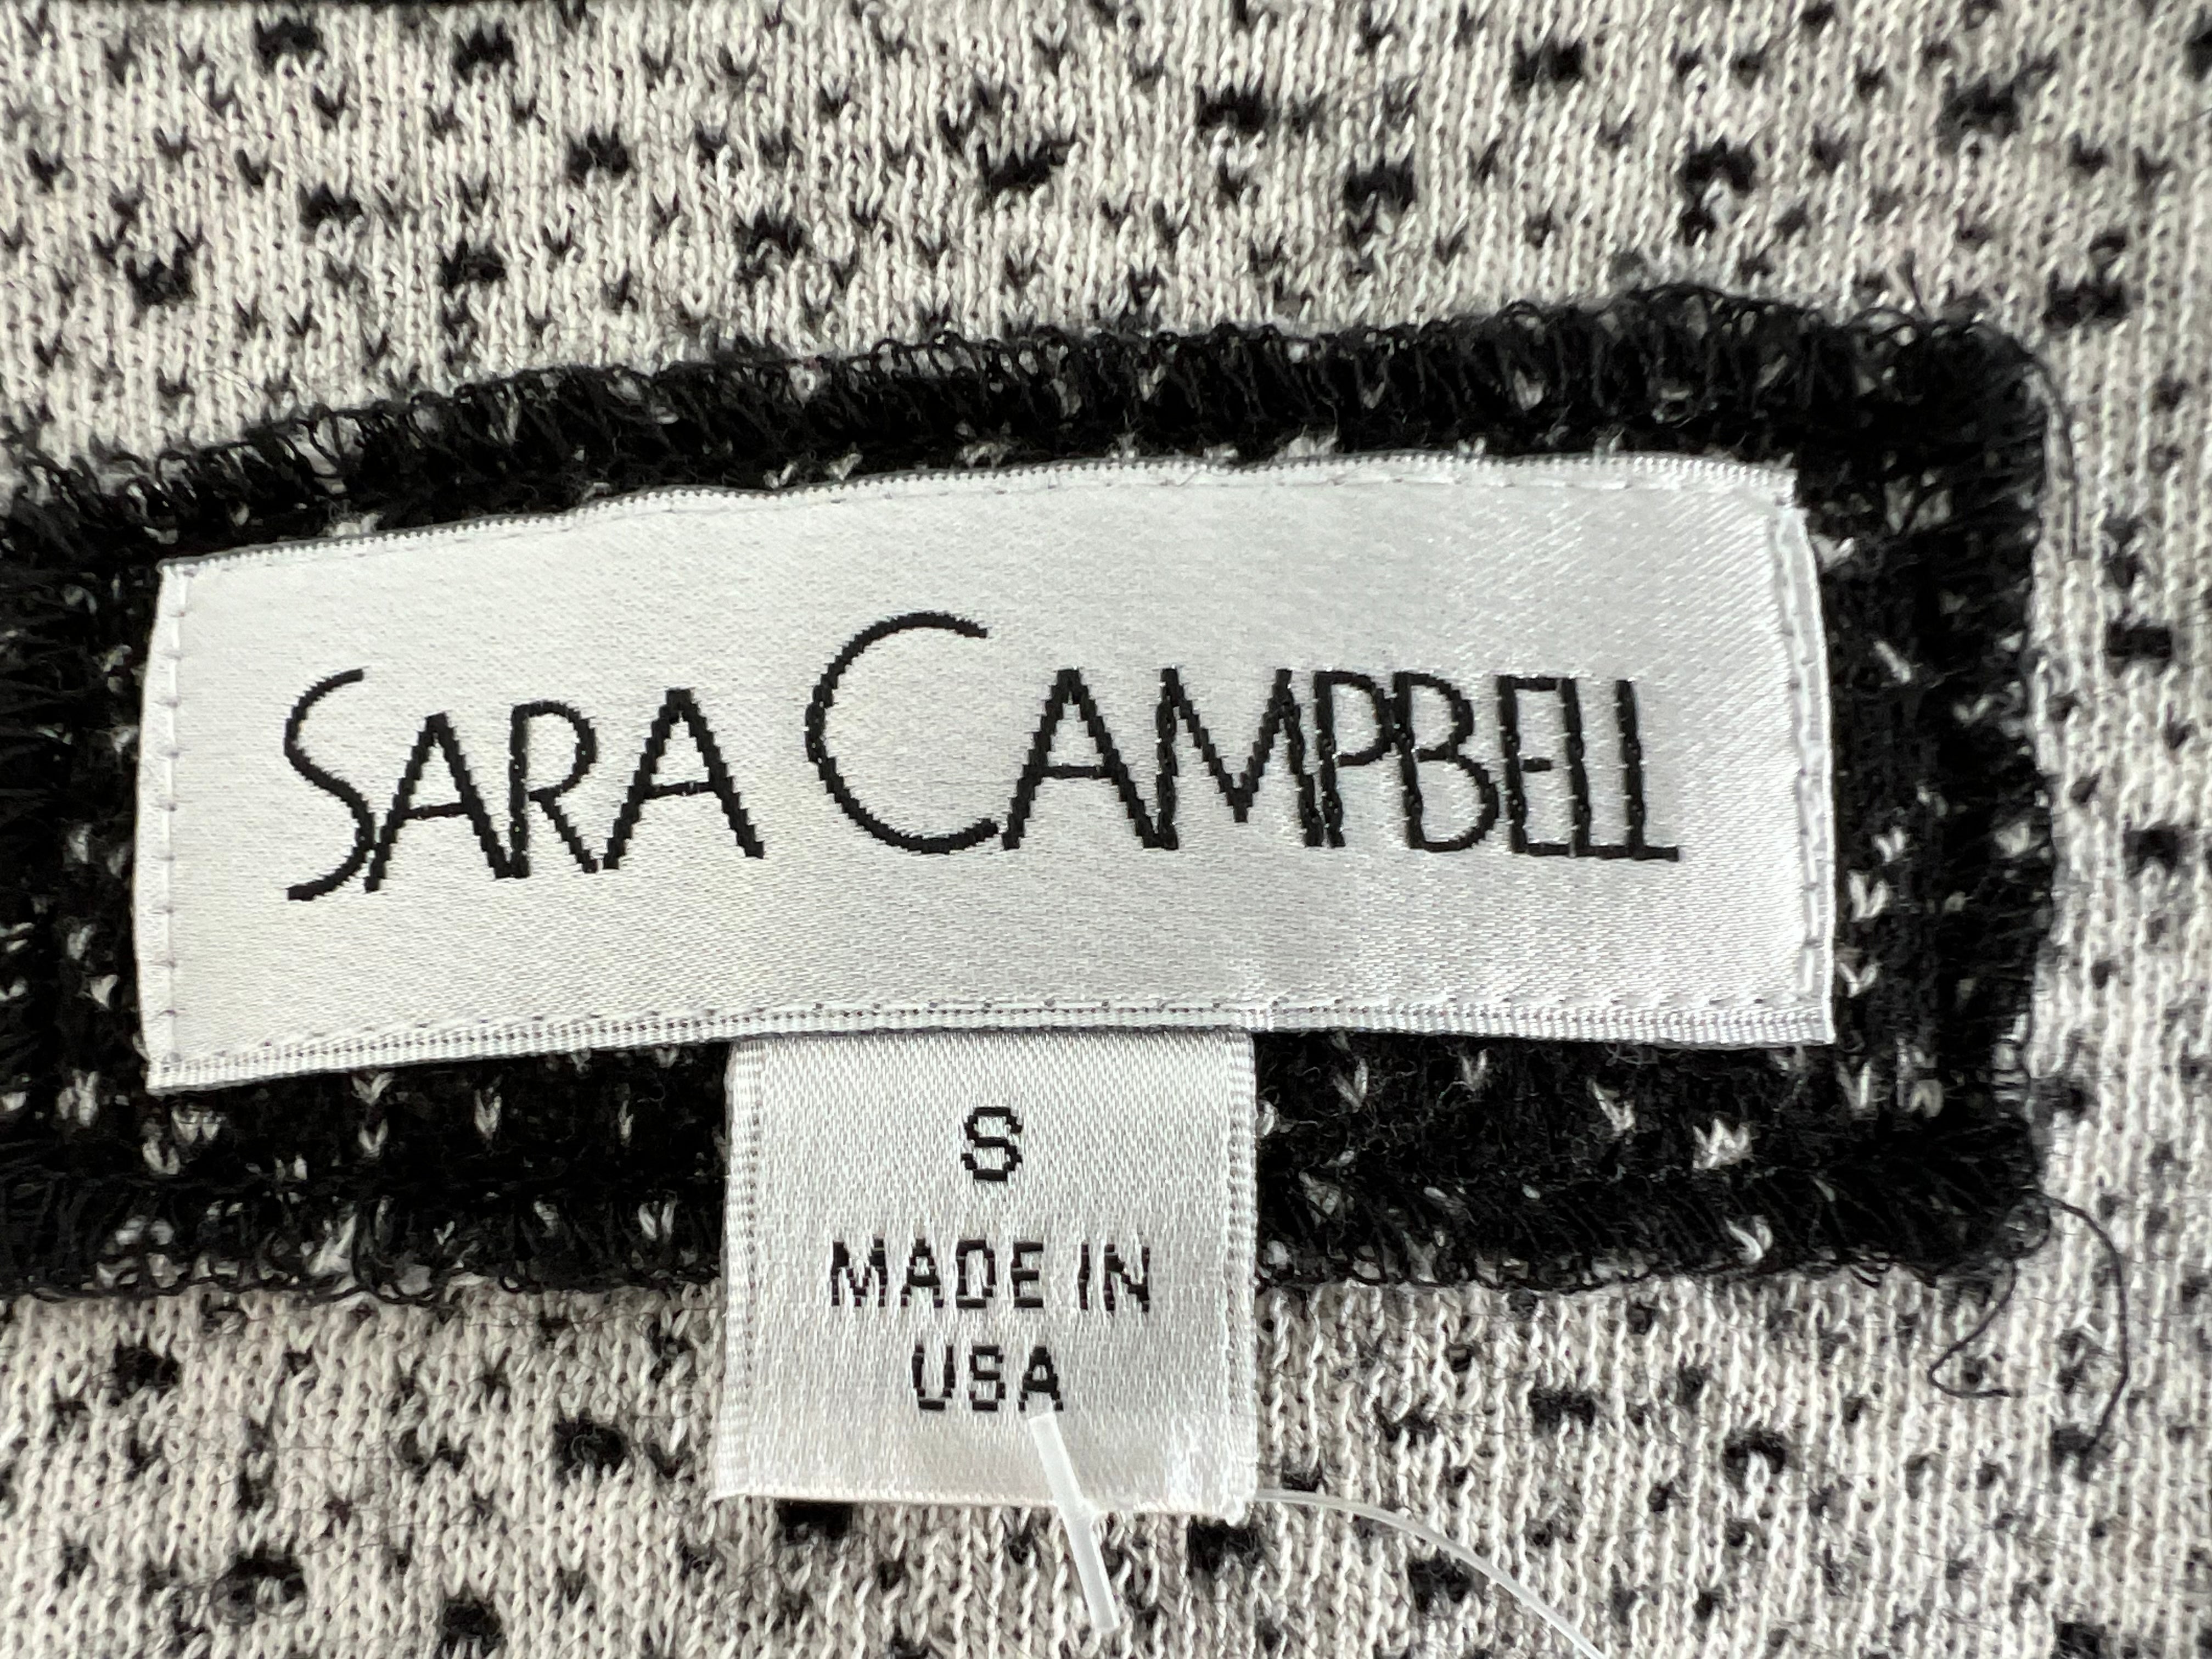 Sara Campbell Black and White Knit Wrap Sweater, 8